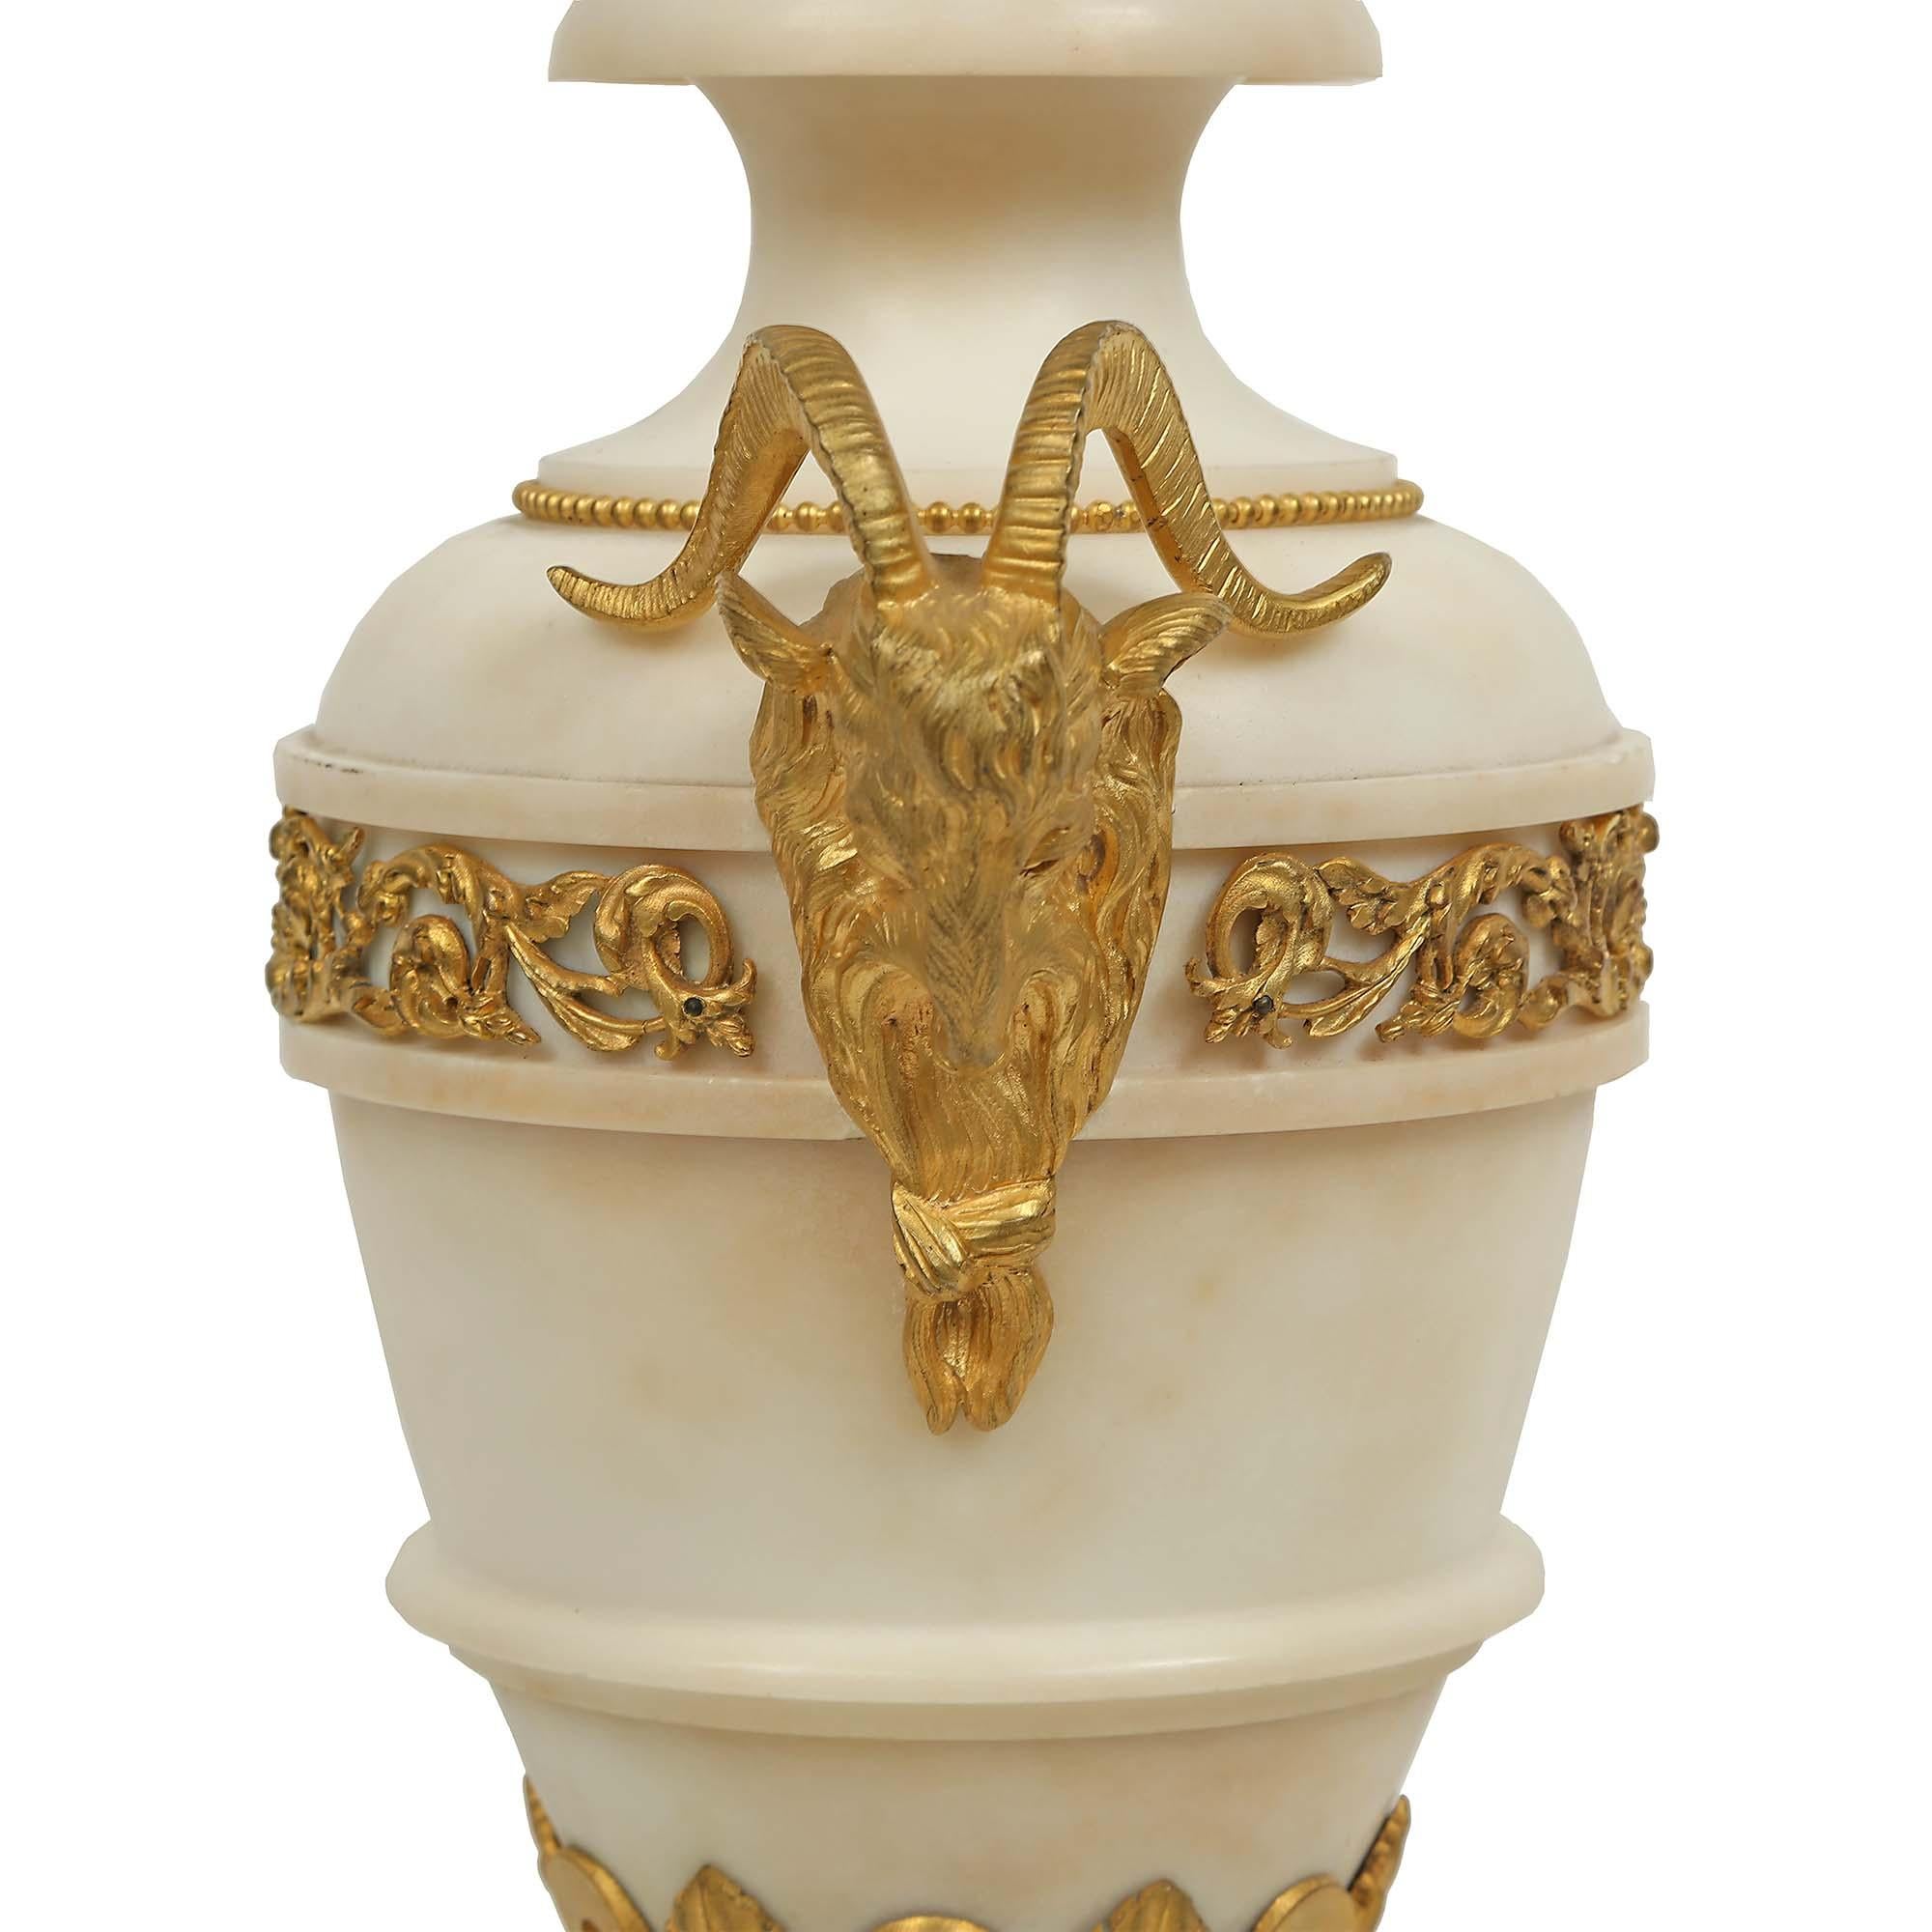 French 19th Century Louis XVI Style White Carrara Marble and Ormolu Urns For Sale 2